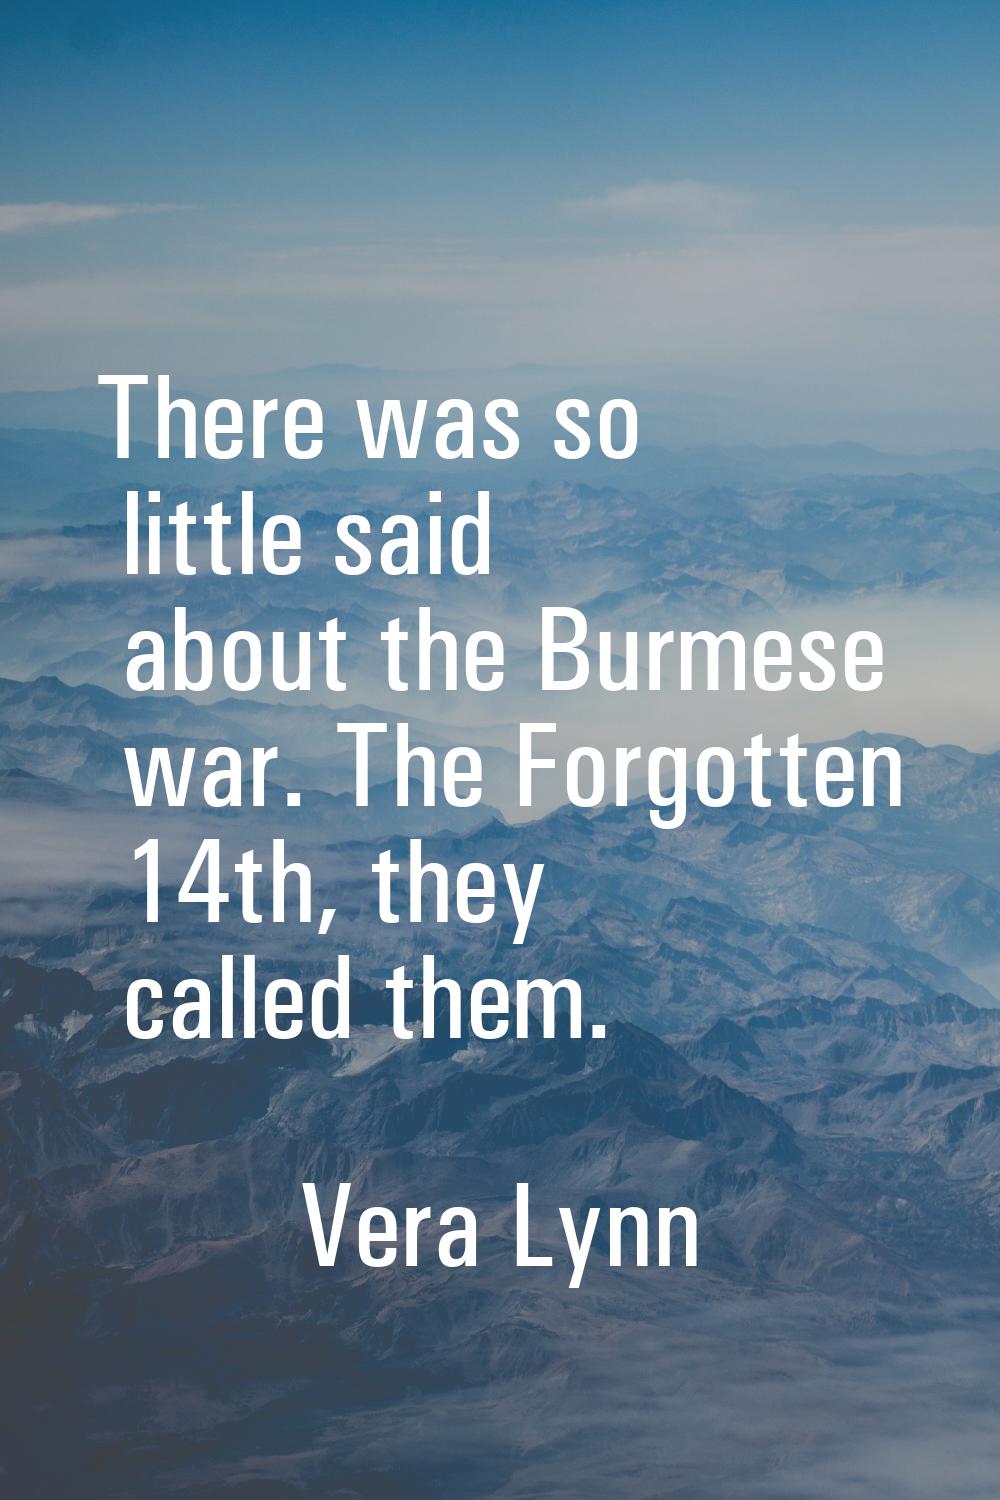 There was so little said about the Burmese war. The Forgotten 14th, they called them.